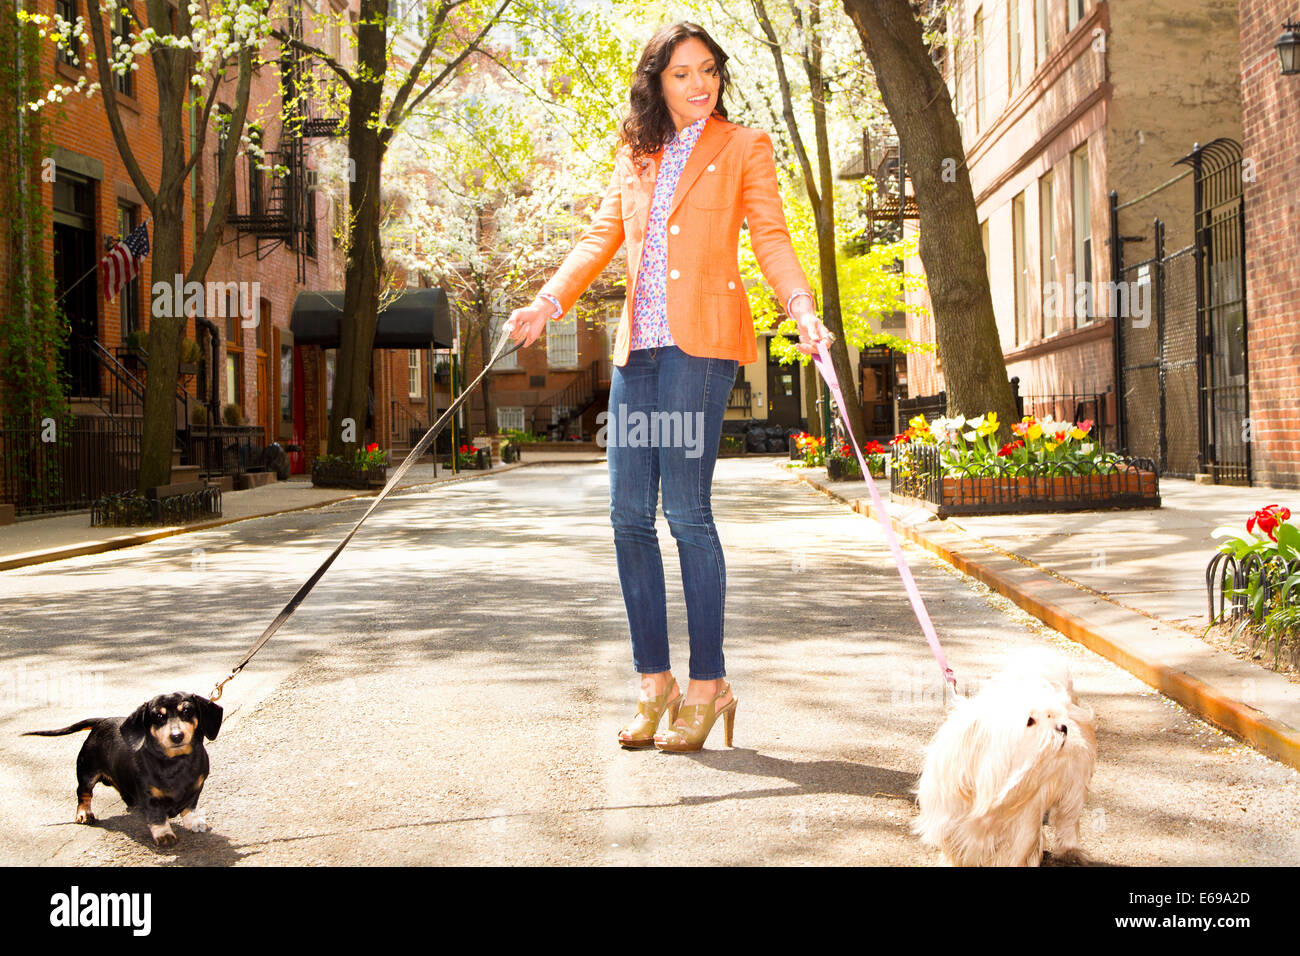 Mixed Race woman walking dogs on city street Banque D'Images